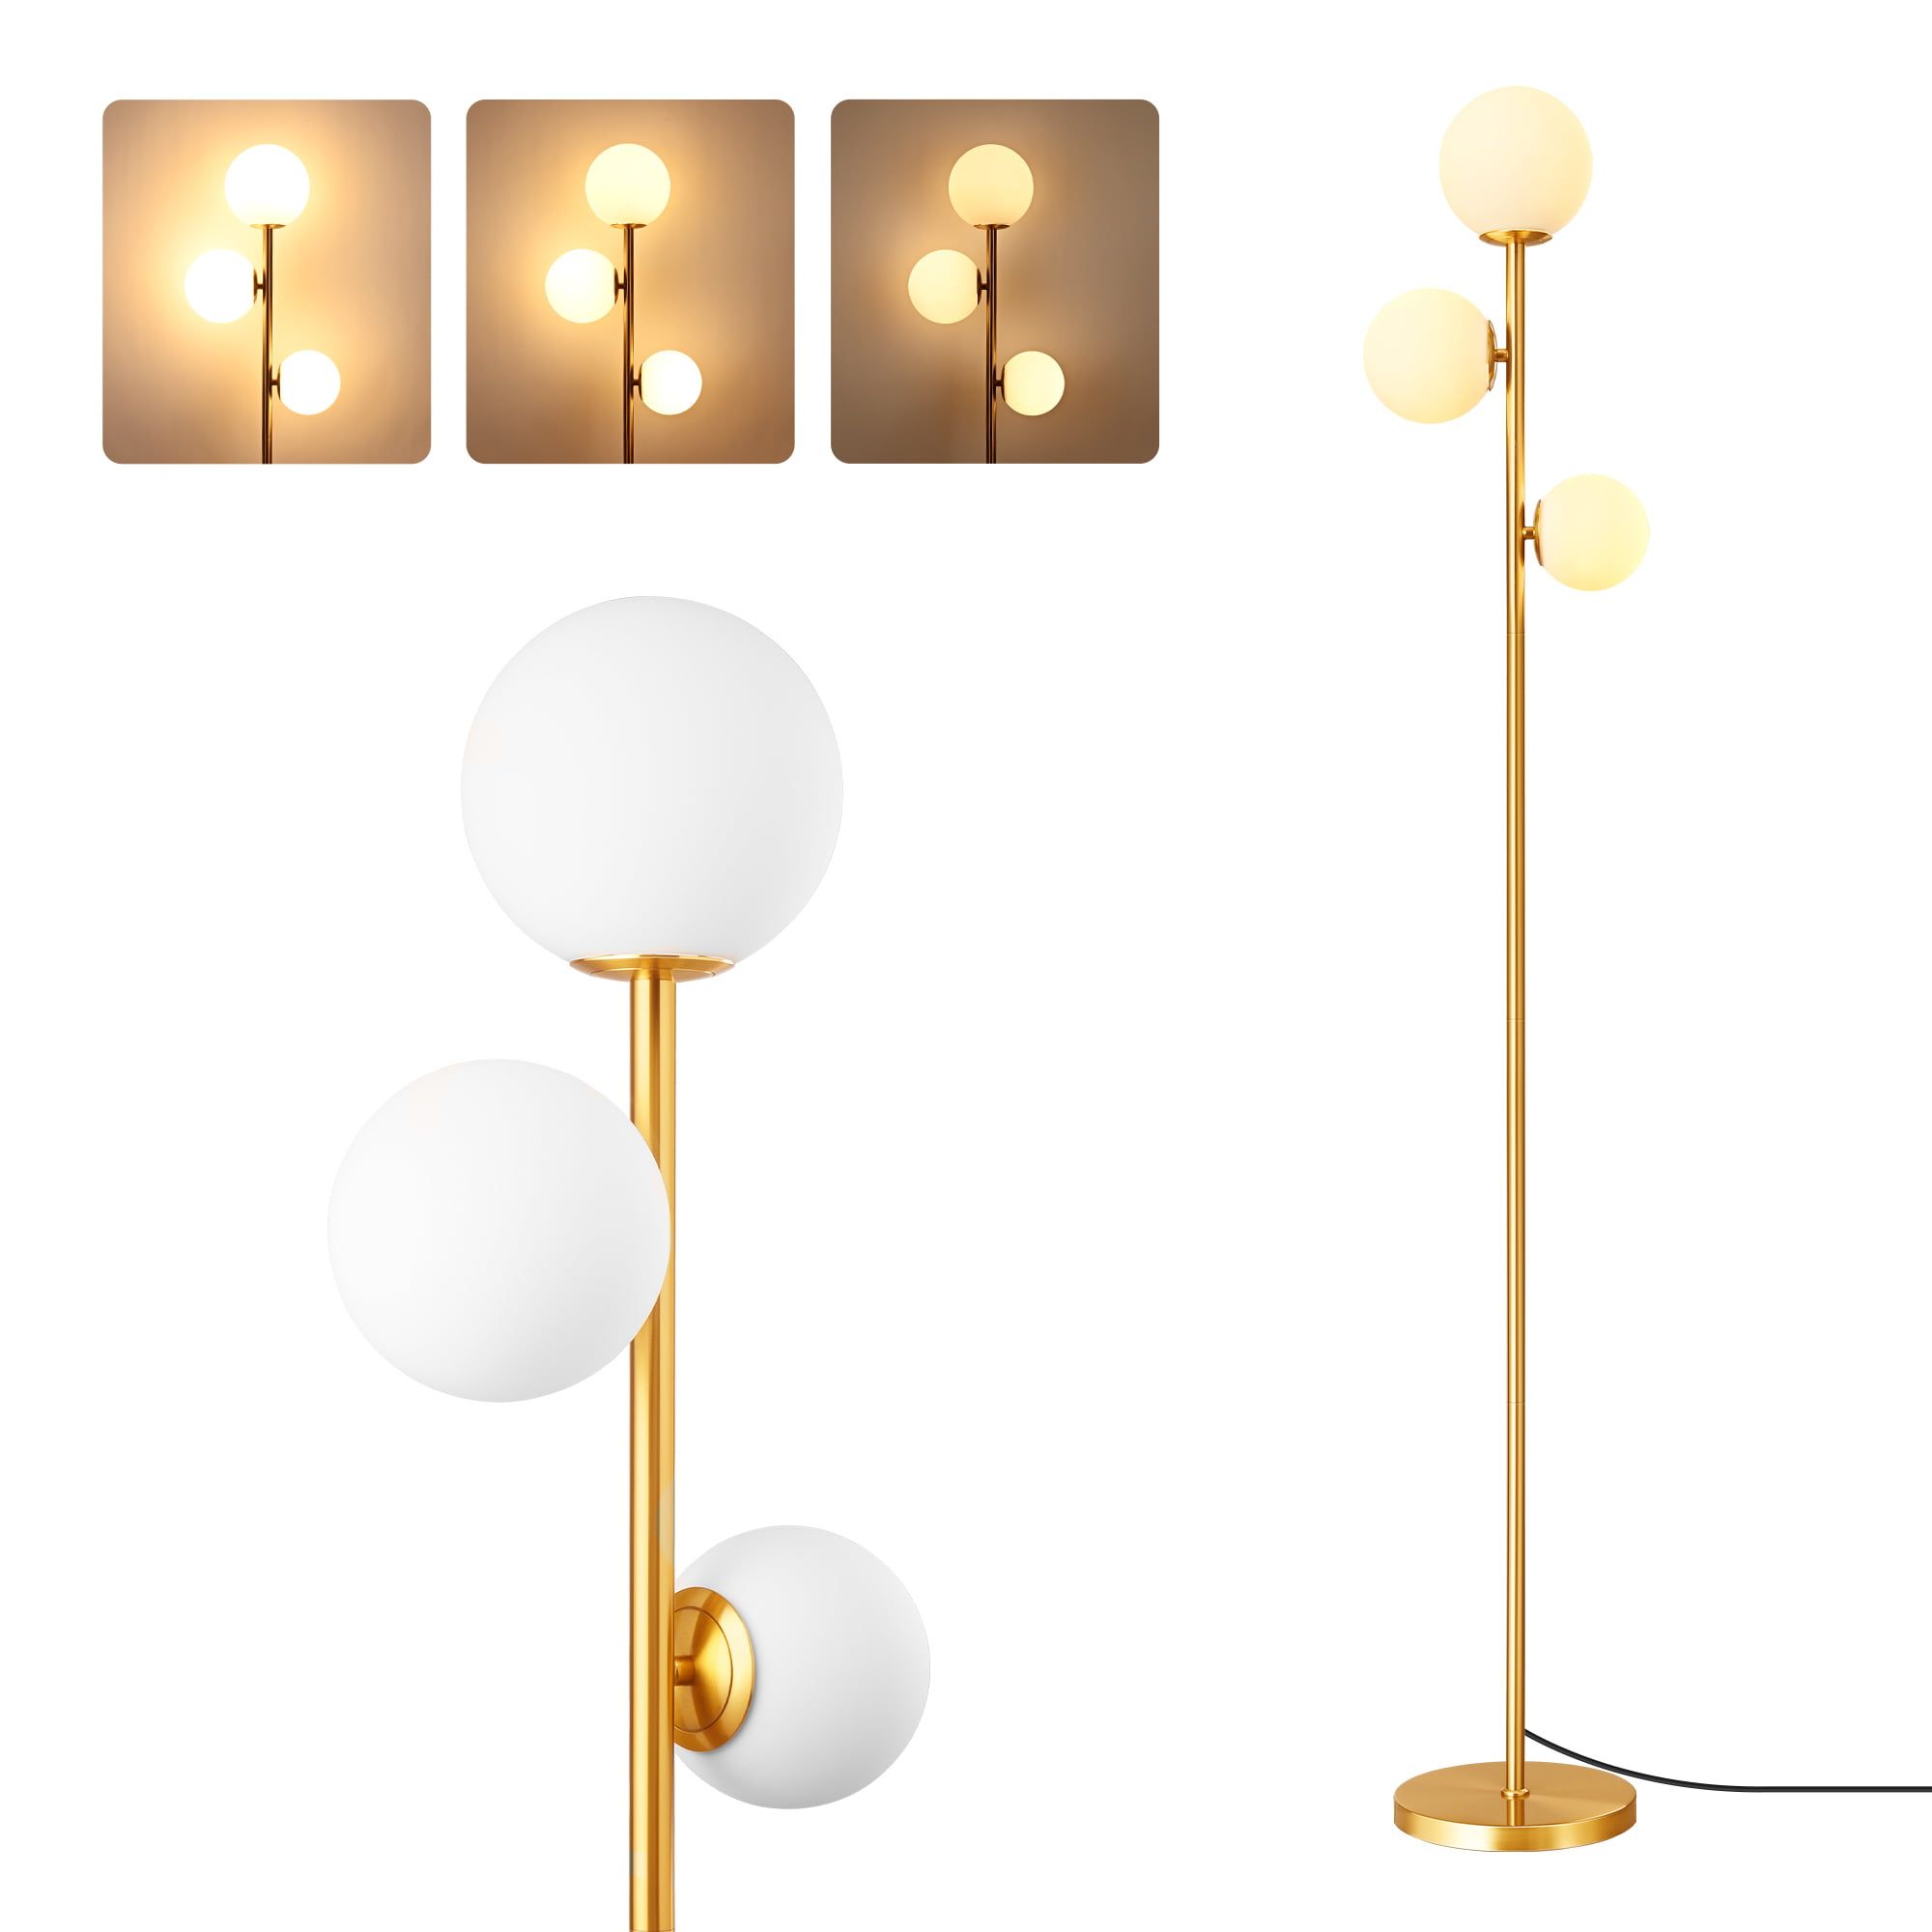 Edishine Sphere Led Gold Floor Lamp, 3 Globe Mid Century Tall Standing Lamps  For Living Room, Stepless Dimming, Built In Led, Frosted Glass Shade –  Walmart With Regard To Sphere Floor Lamps (View 16 of 20)